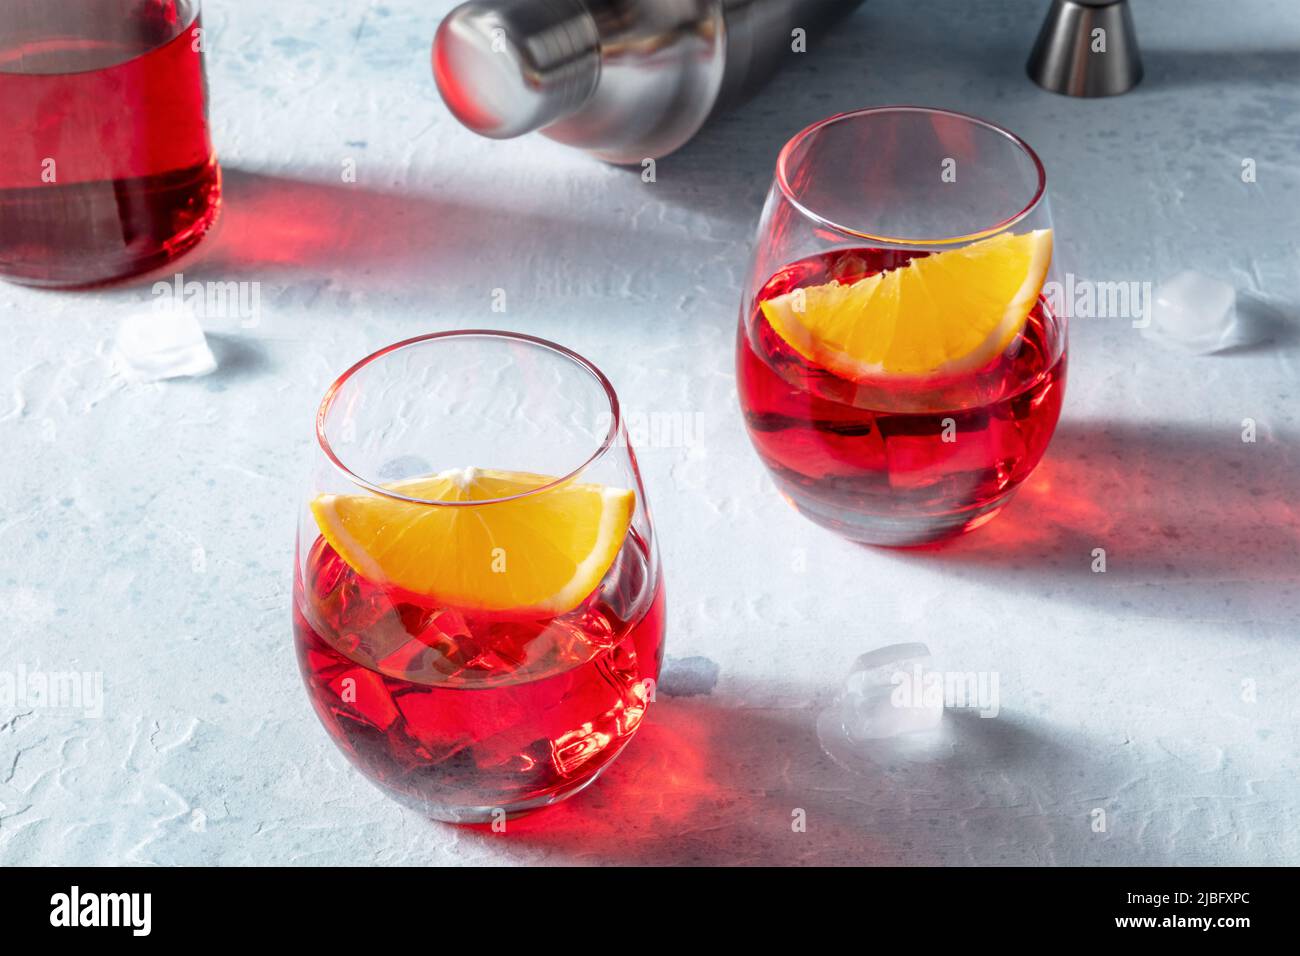 Campari orange cocktails with a jigger and a shaker, with ice cubes and a bottle in the background, on a slate table Stock Photo